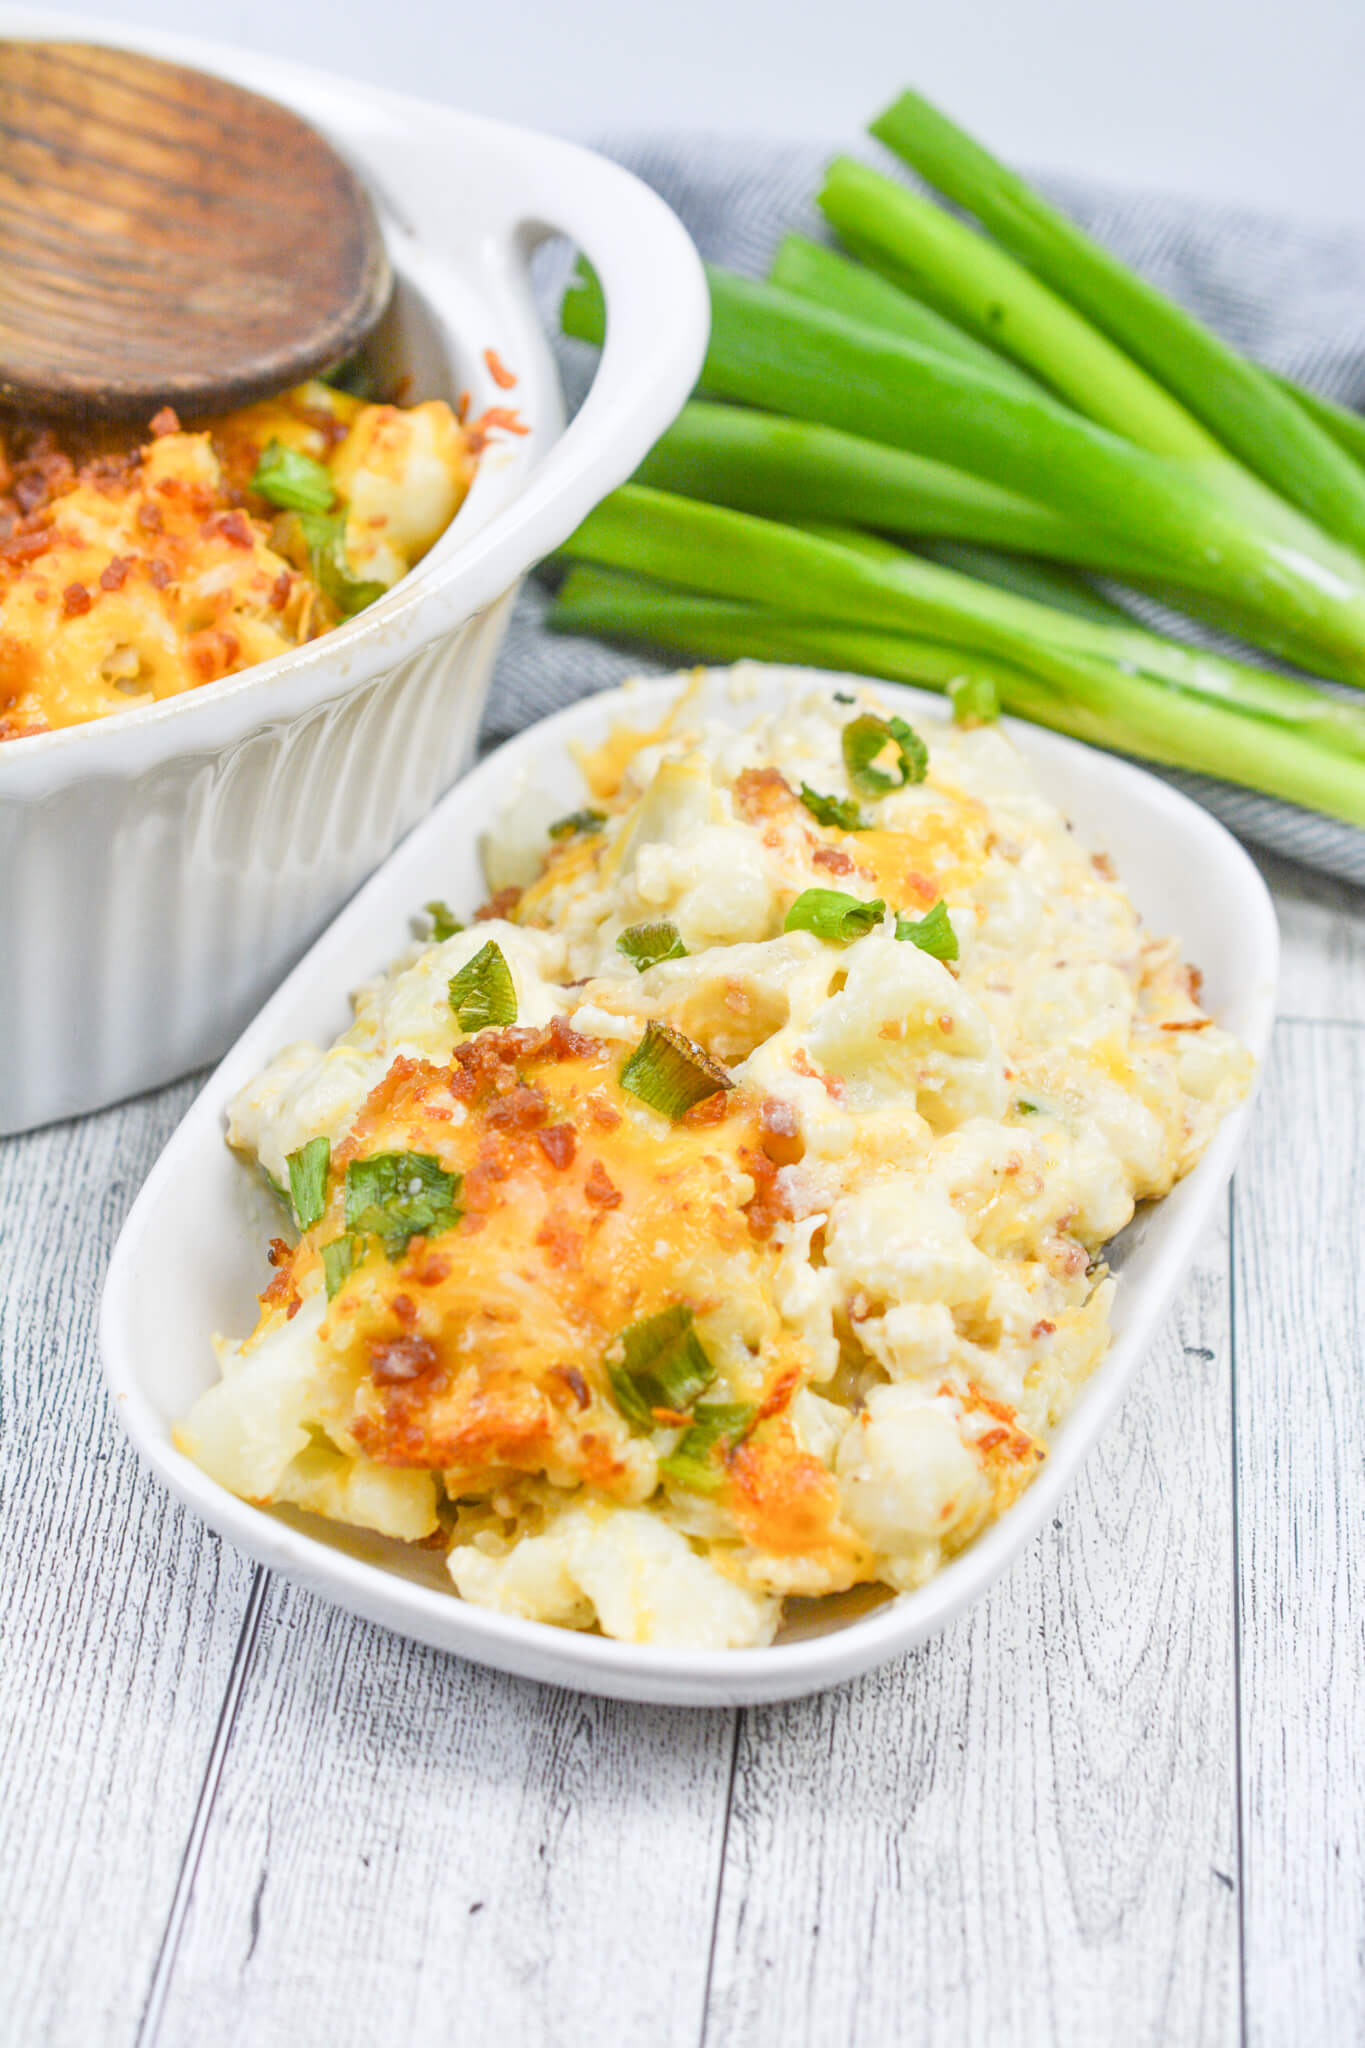 A helping of the loaded cheesy cauliflower bake.